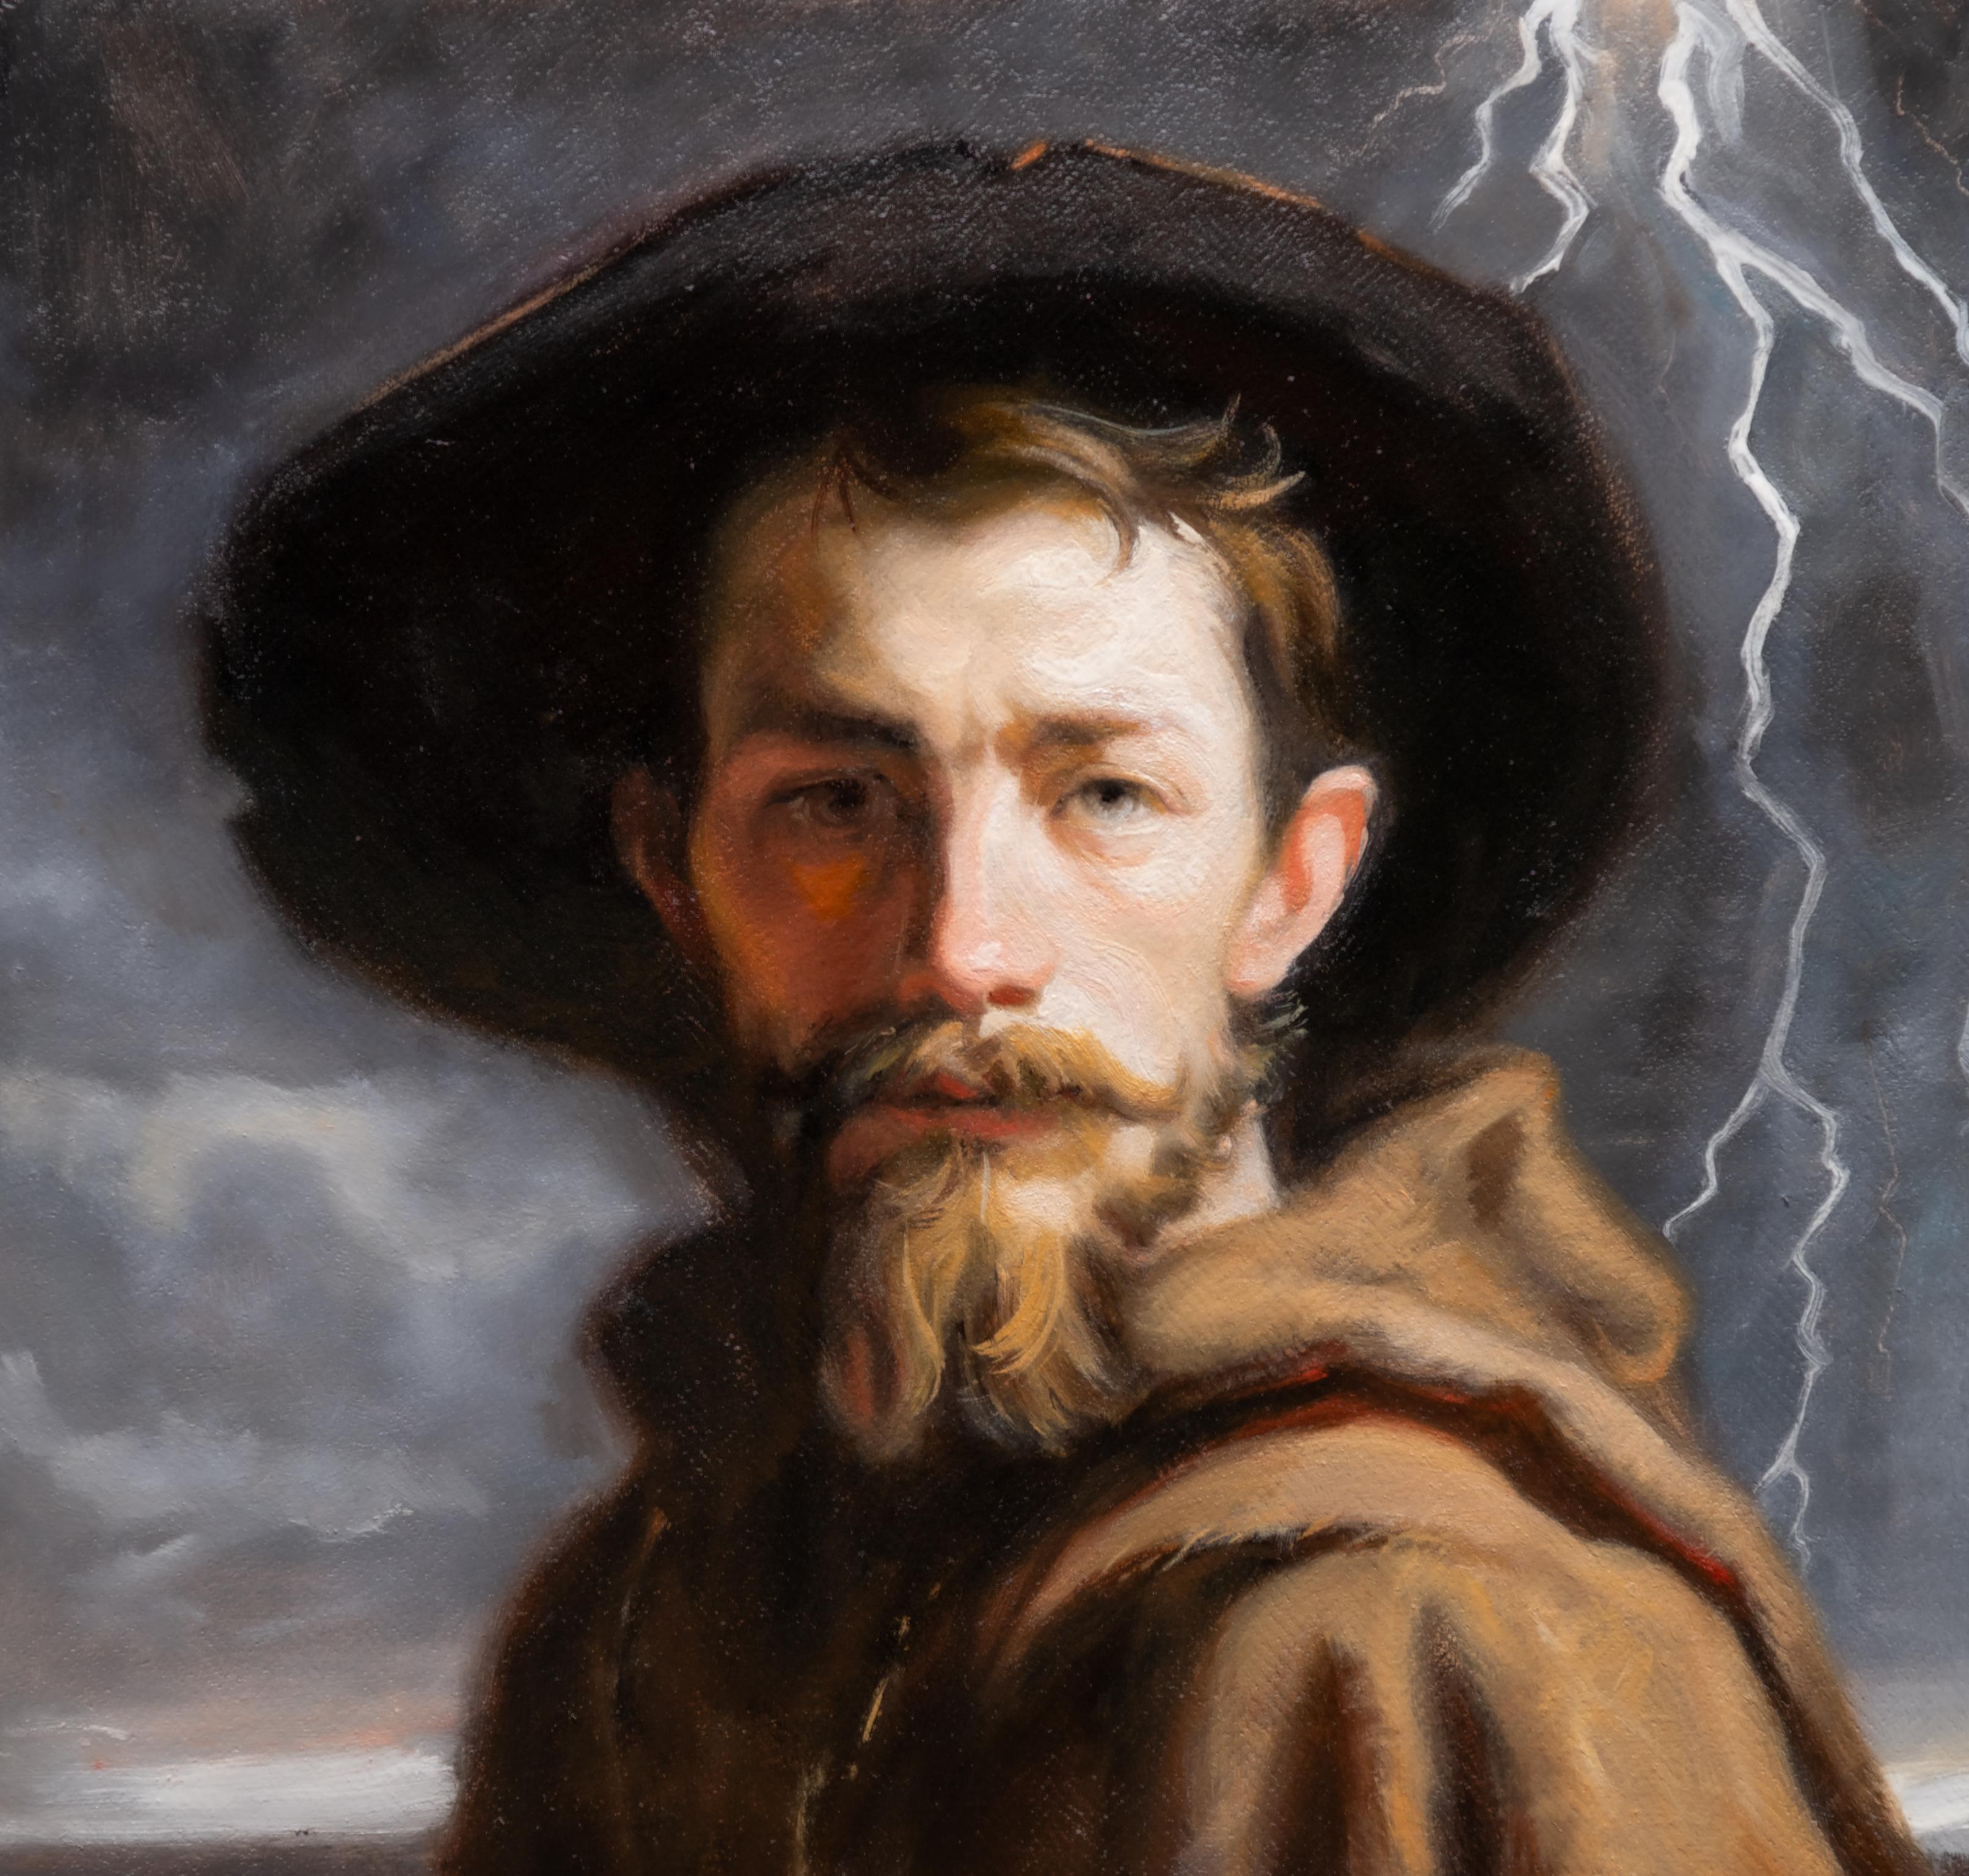 The Traveler  Oil  A Journey    Florence Academy  Oil  Sunny or a Chaotic Storm - Realist Painting by Samuel S. Hoskins